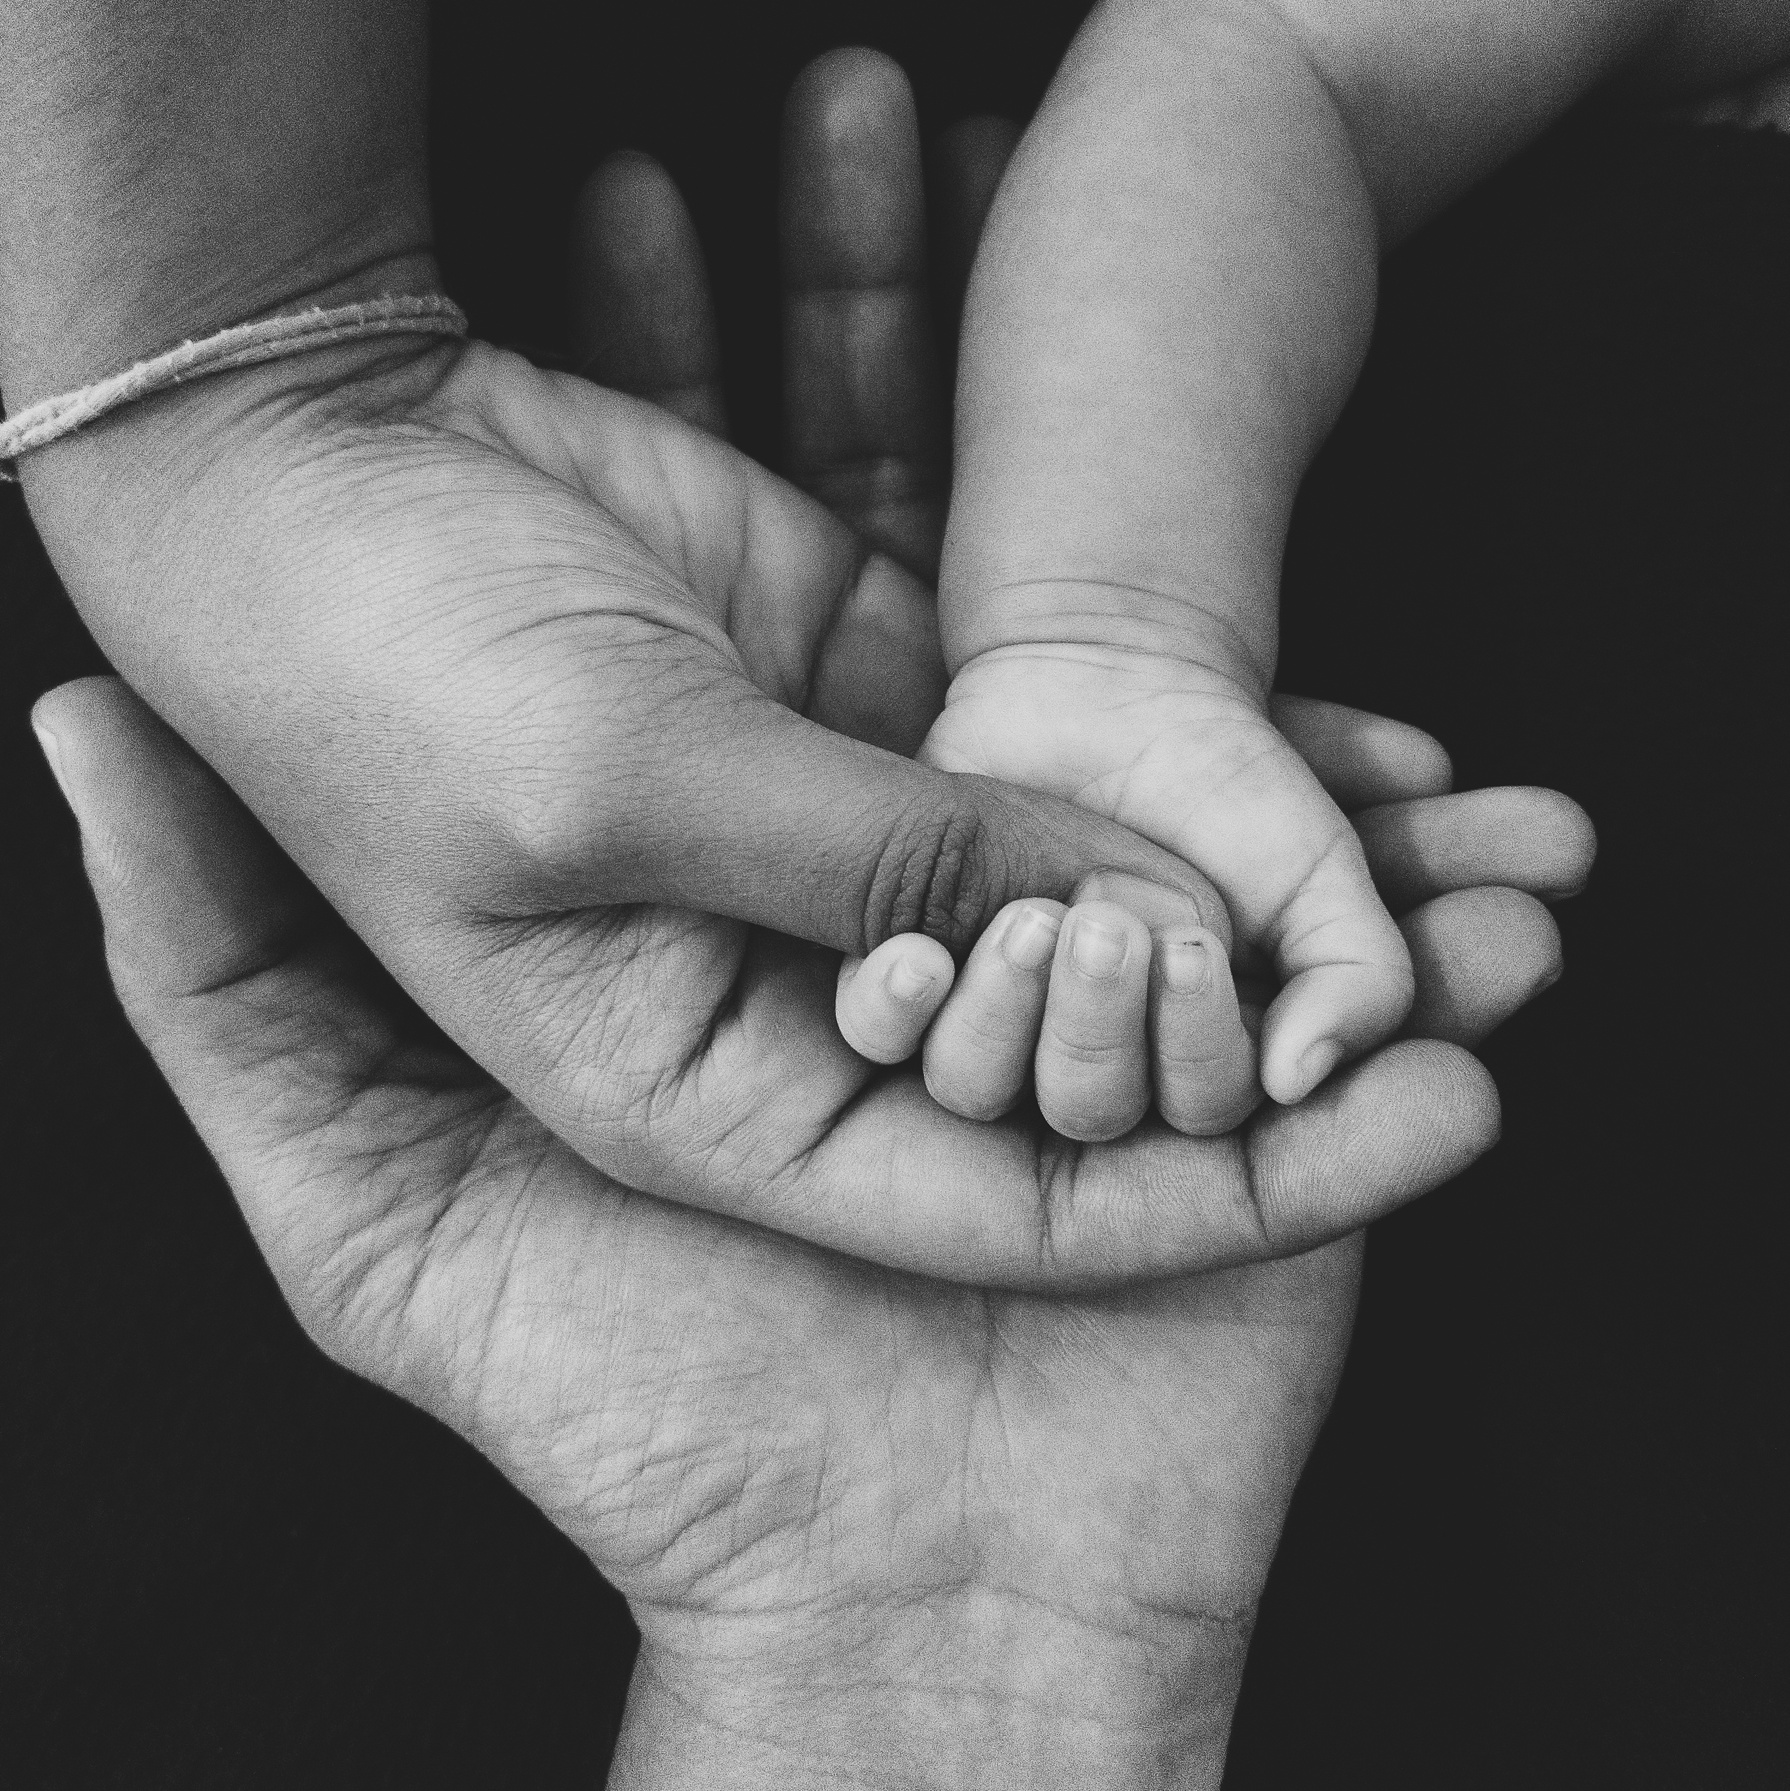 Monochrome Photo of a Baby's Hand